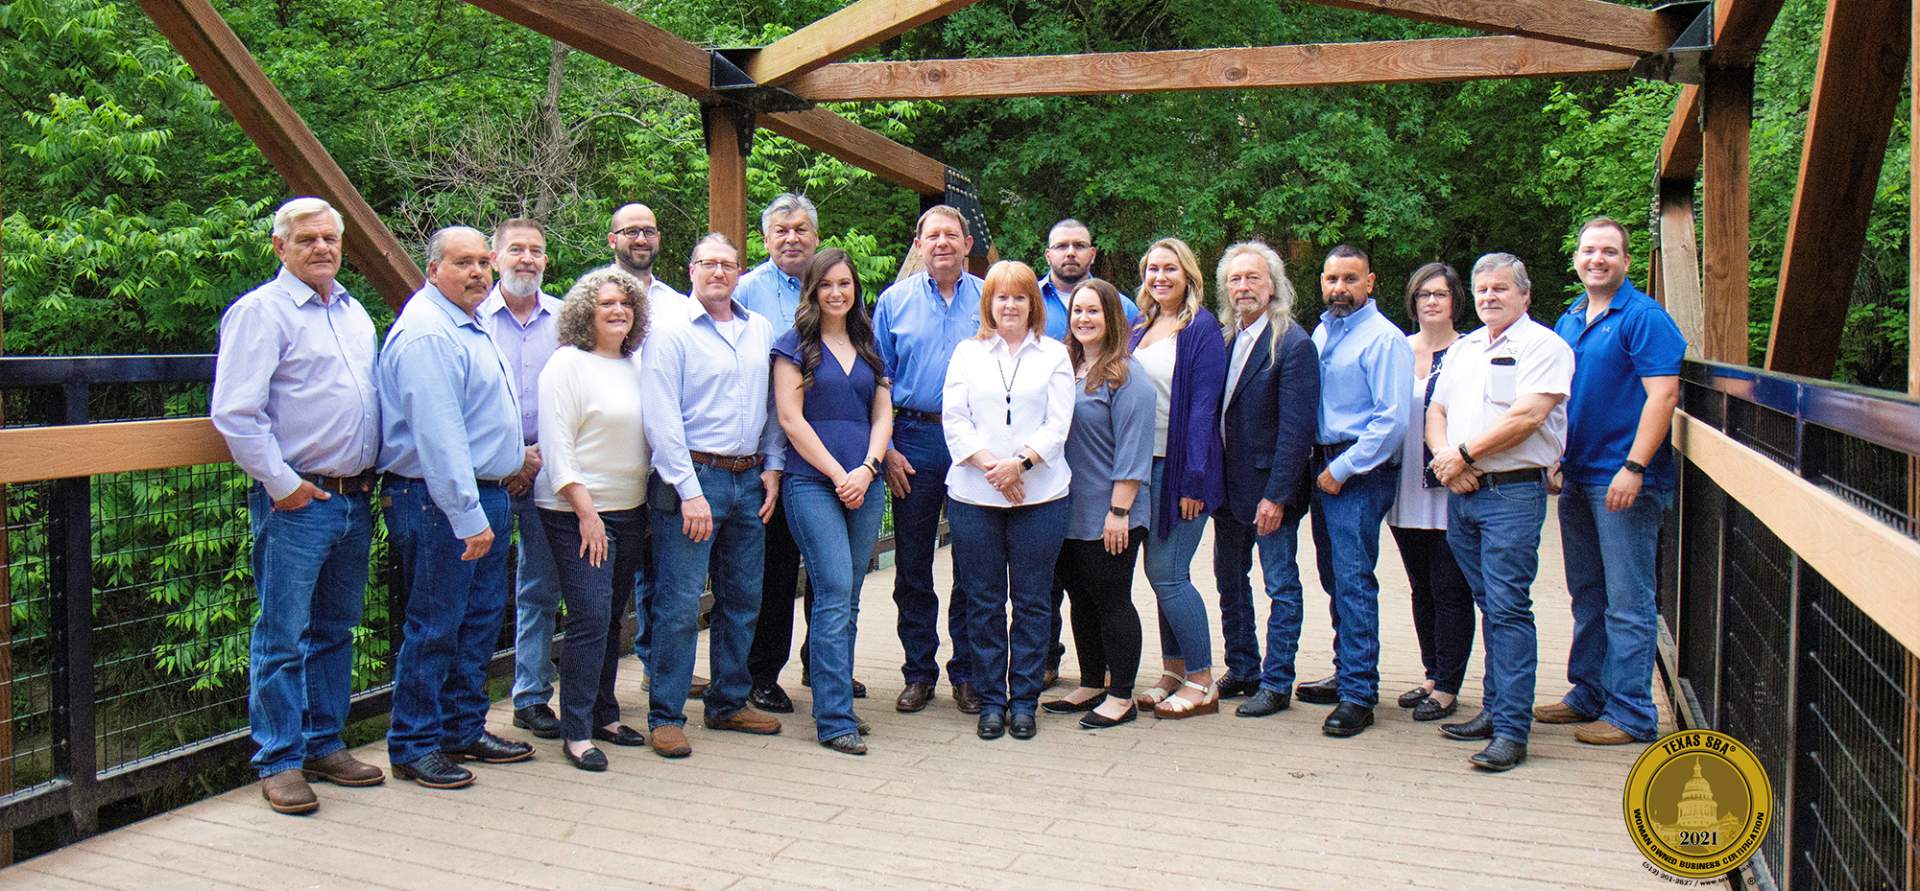 The IDG Services team in Texas